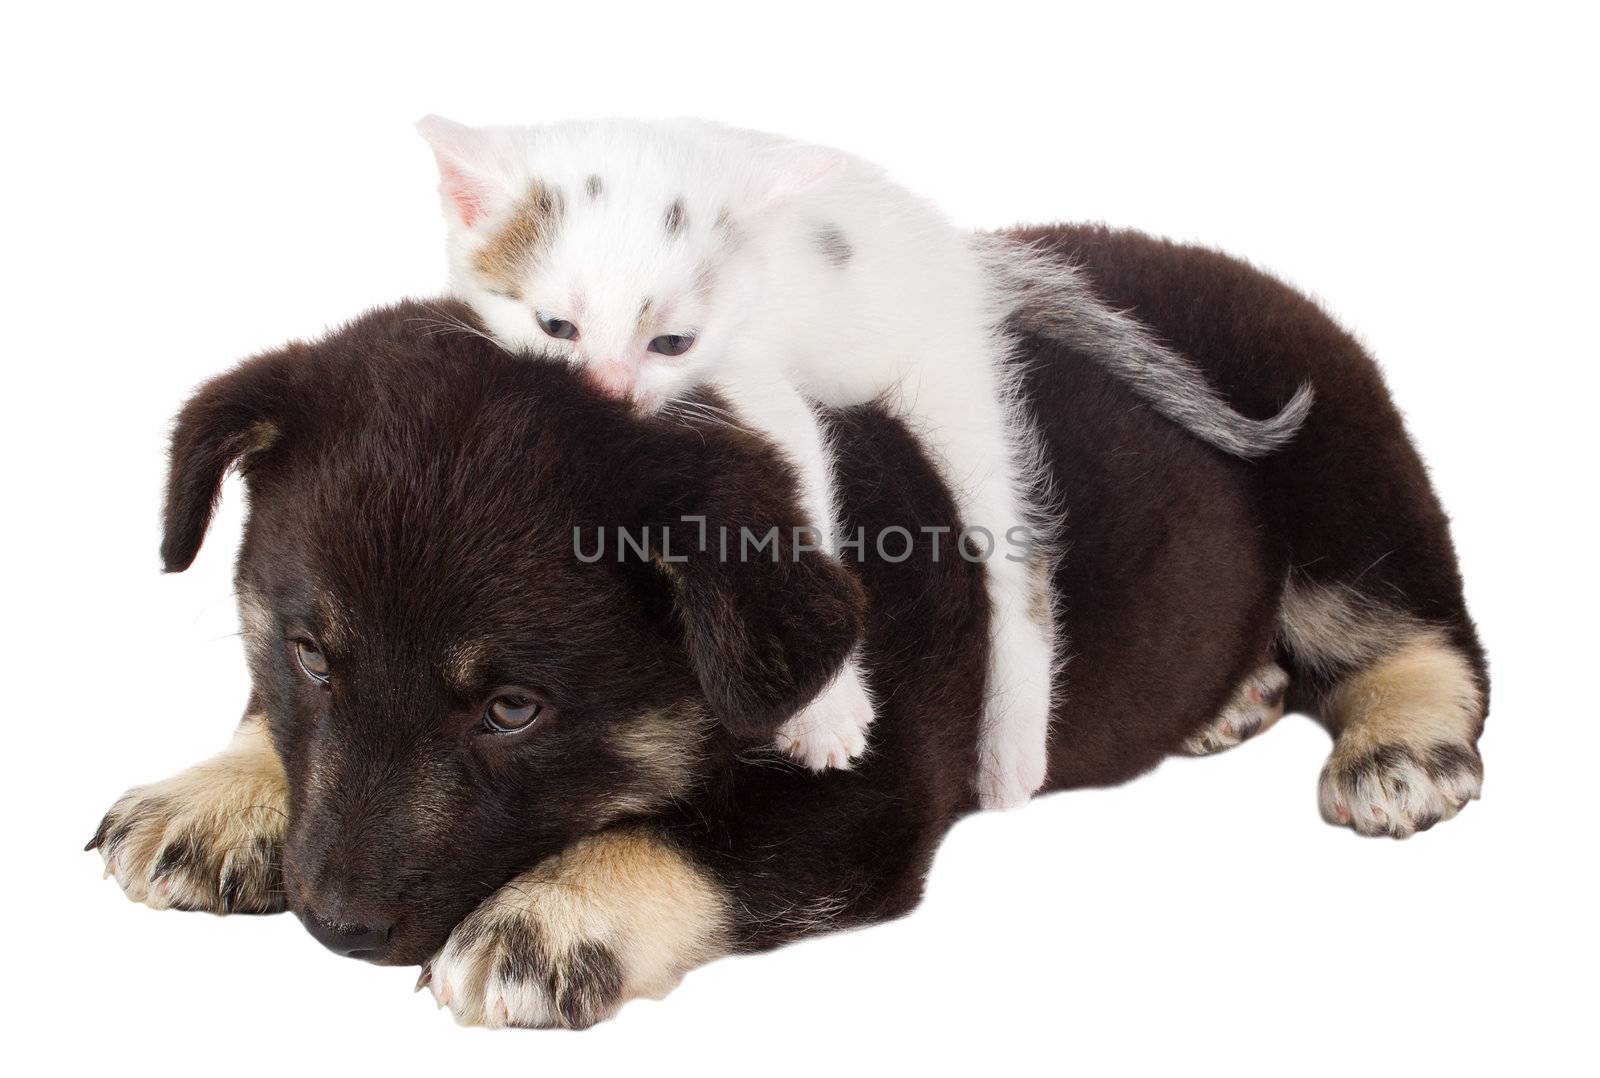 close-up puppy and cat, isolated on white